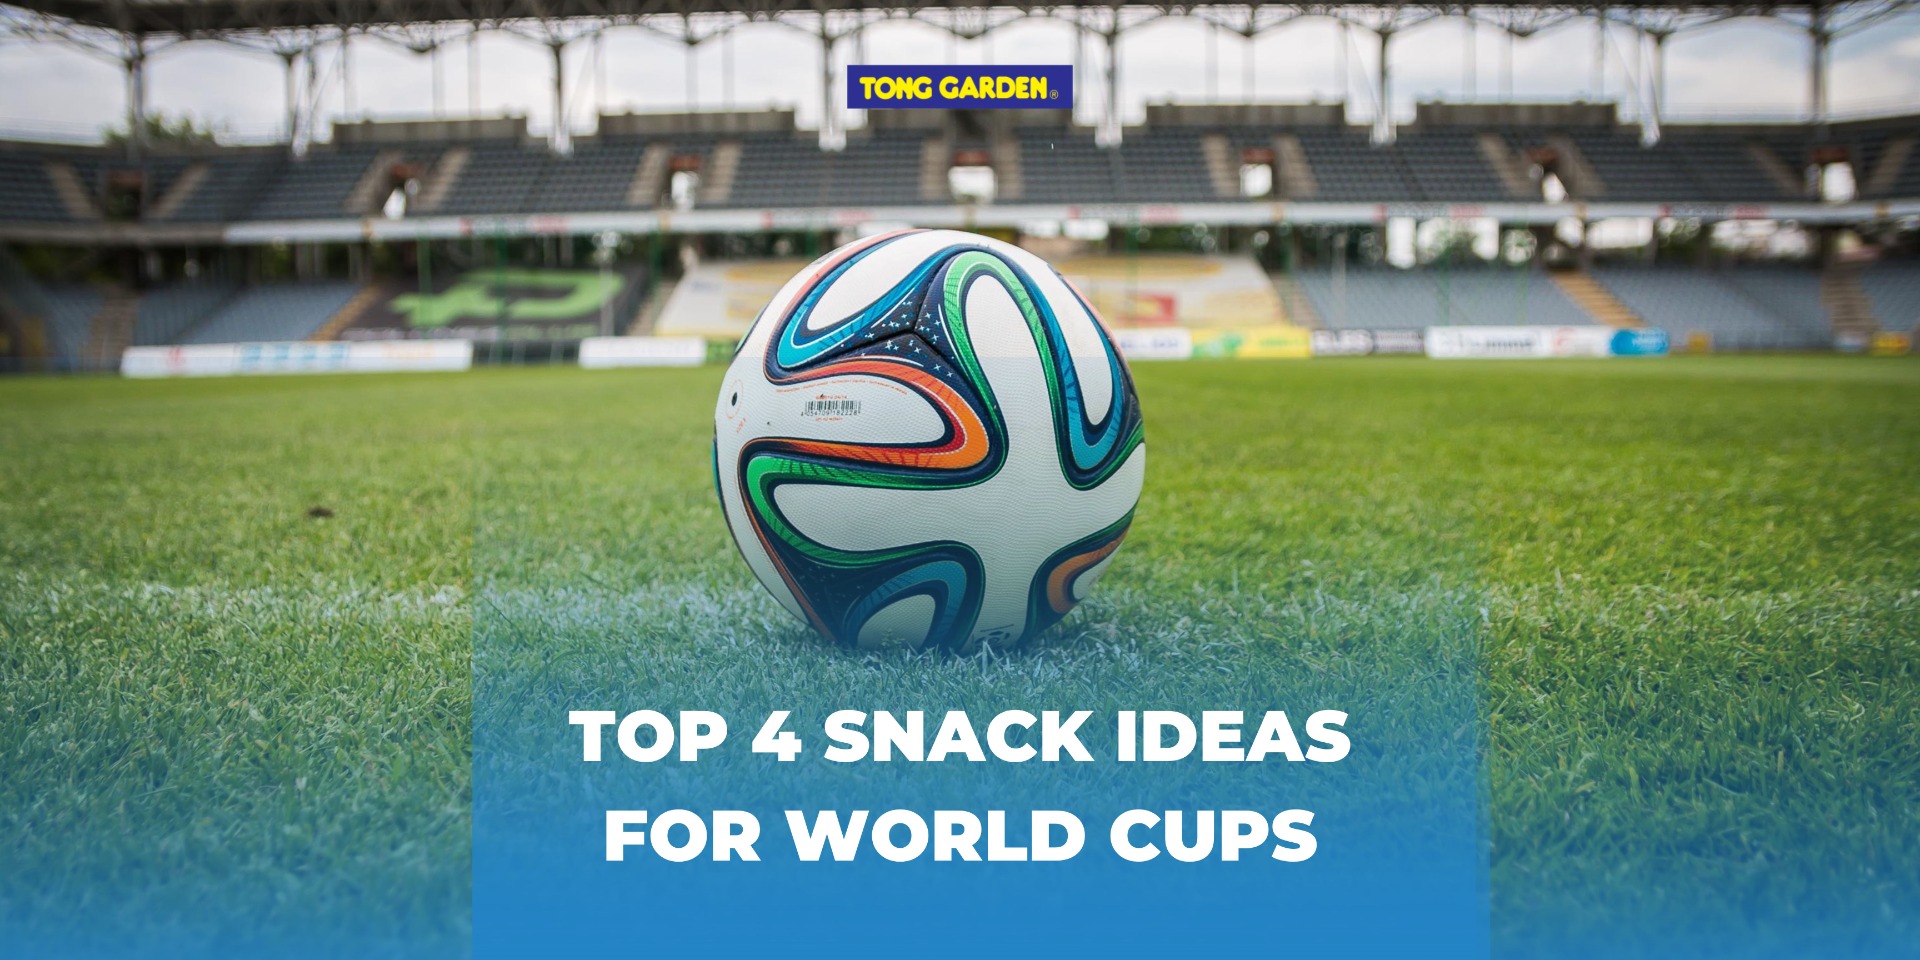 Top 4 Snack Ideas for World Cup